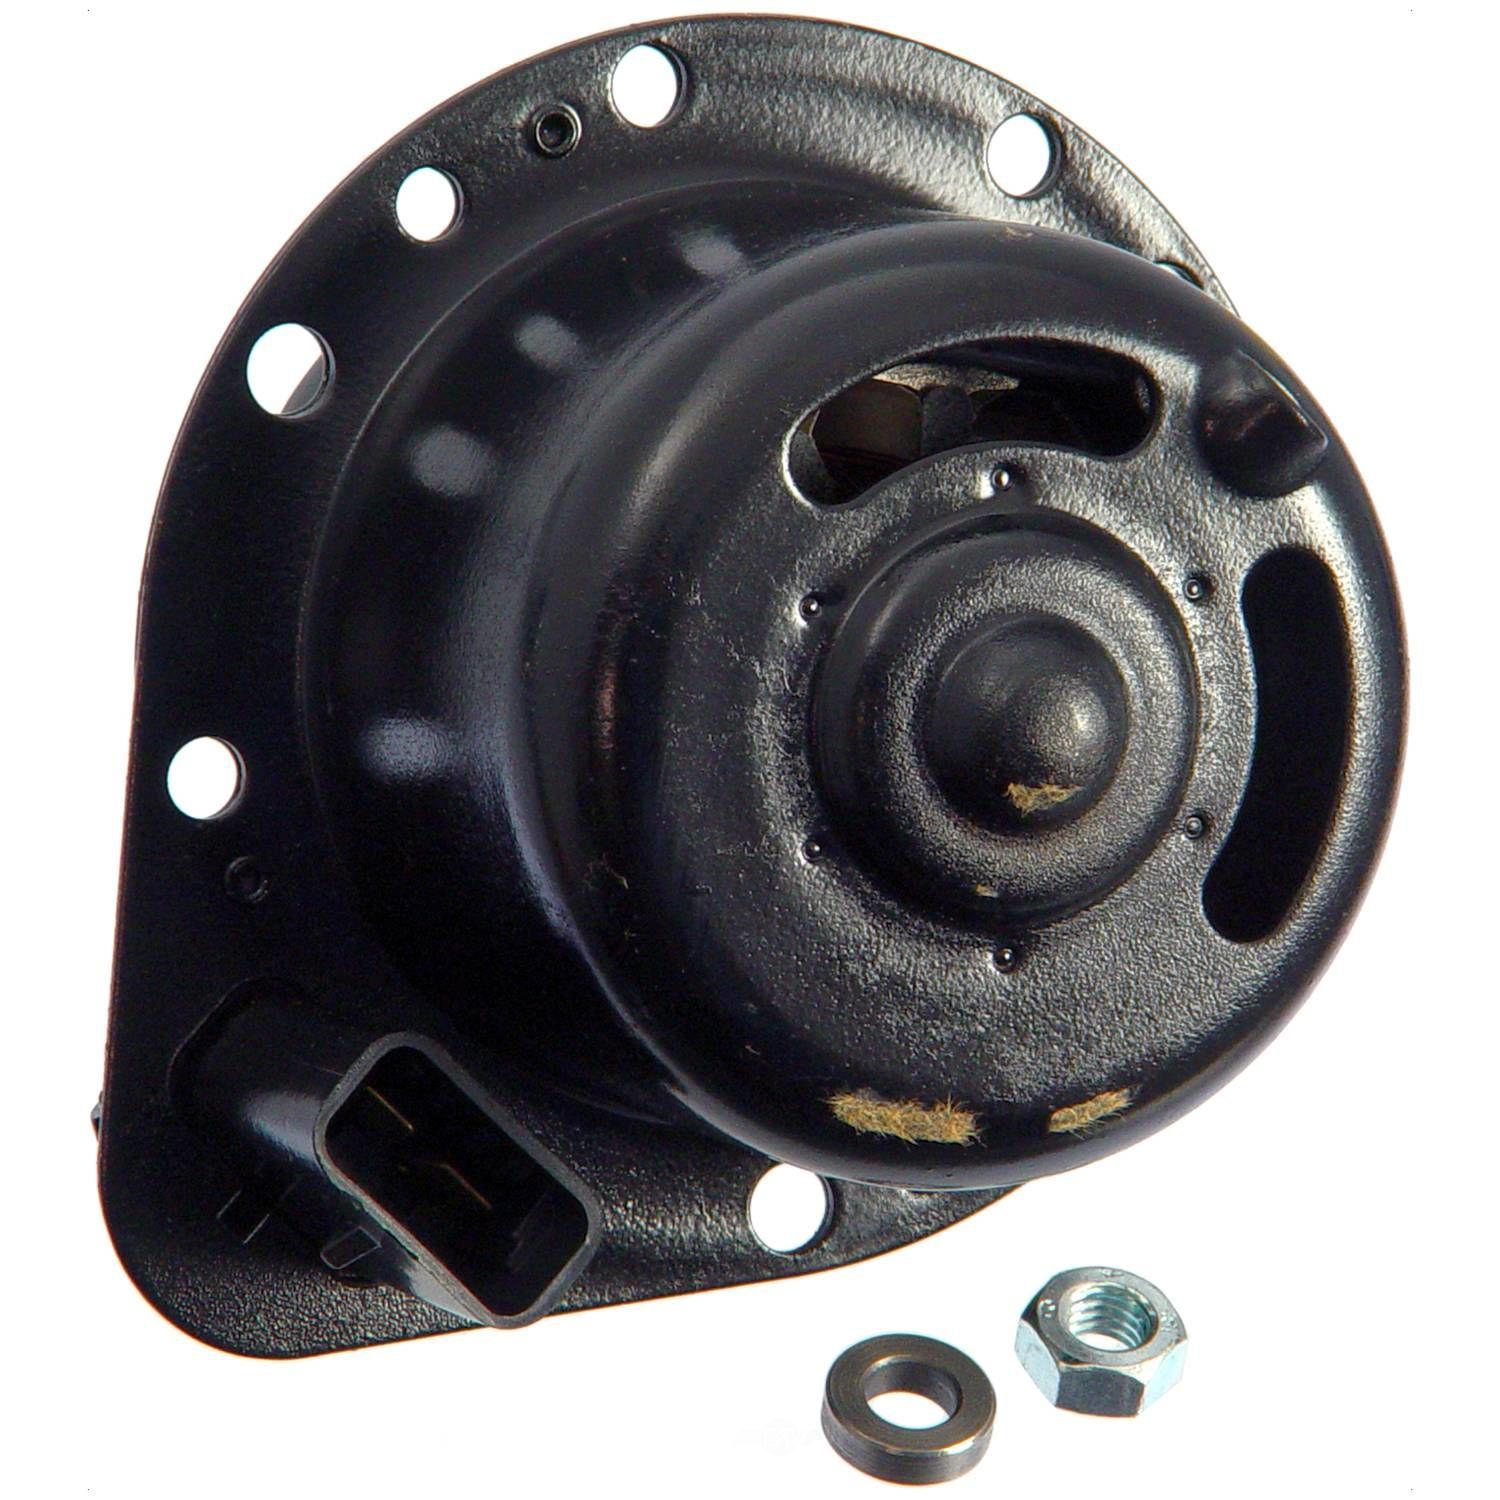 CONTINENTAL AFTERMARKET - Engine Cooling Fan Motor - CA1 PM526